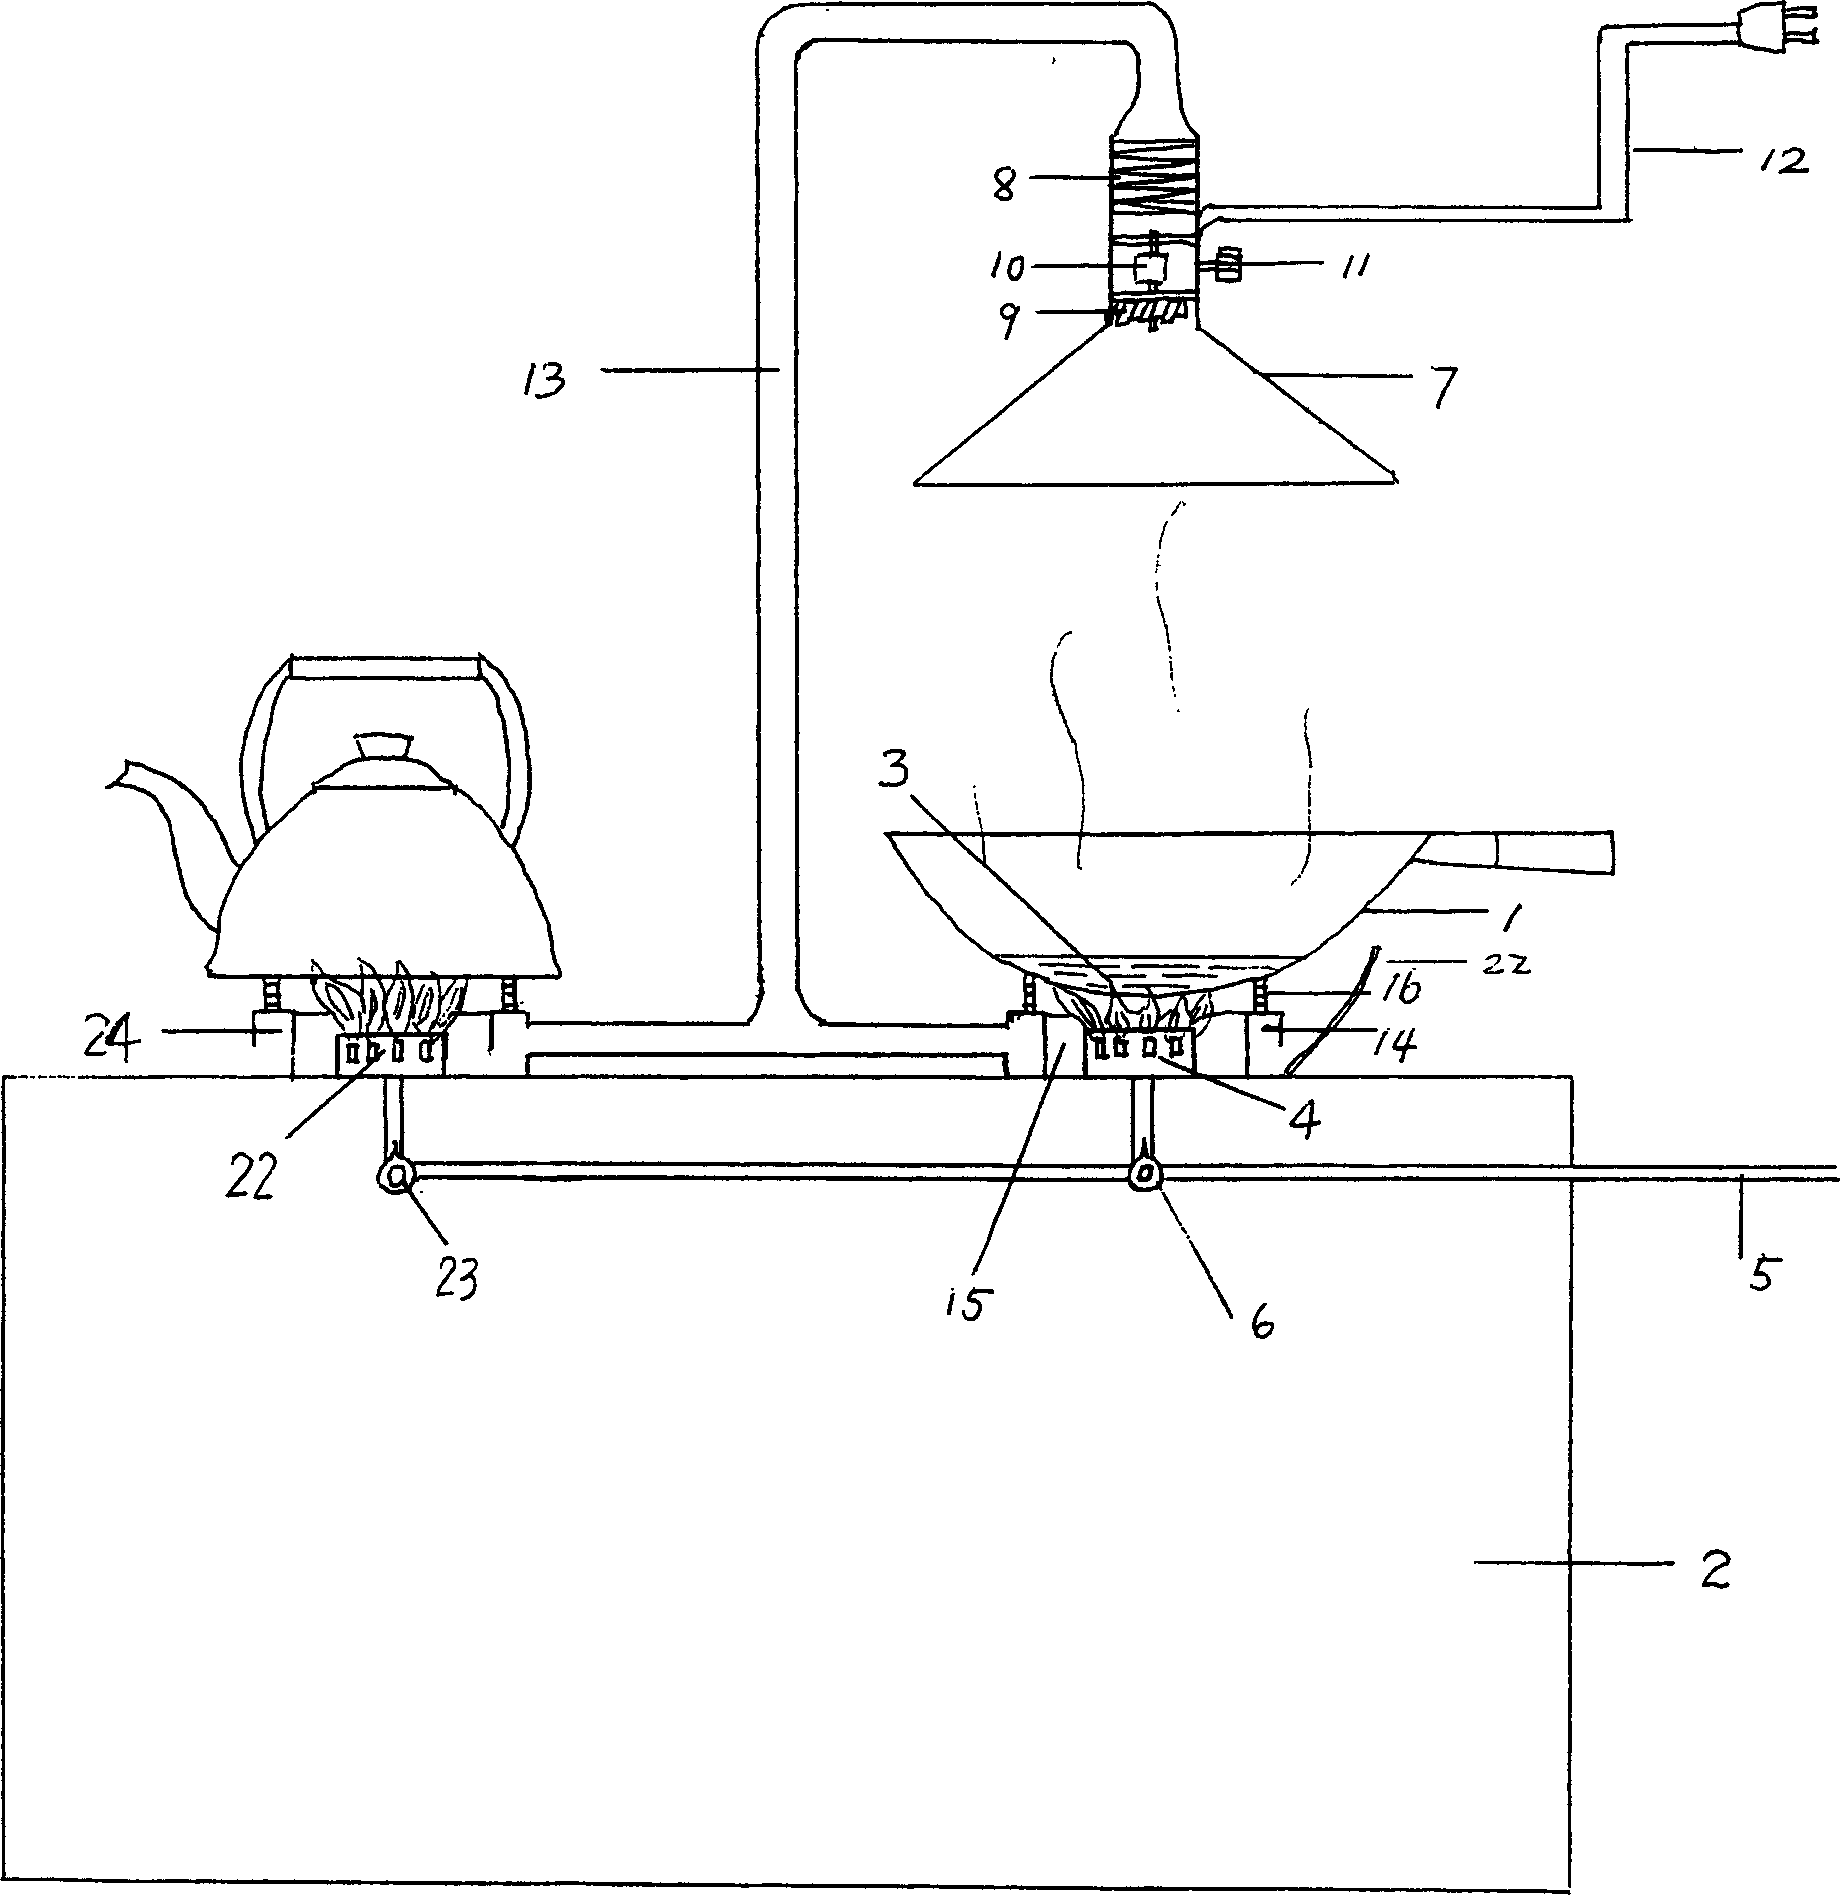 Apparatus and method for treating cooking fume, peculiar small gas and other harmful substance